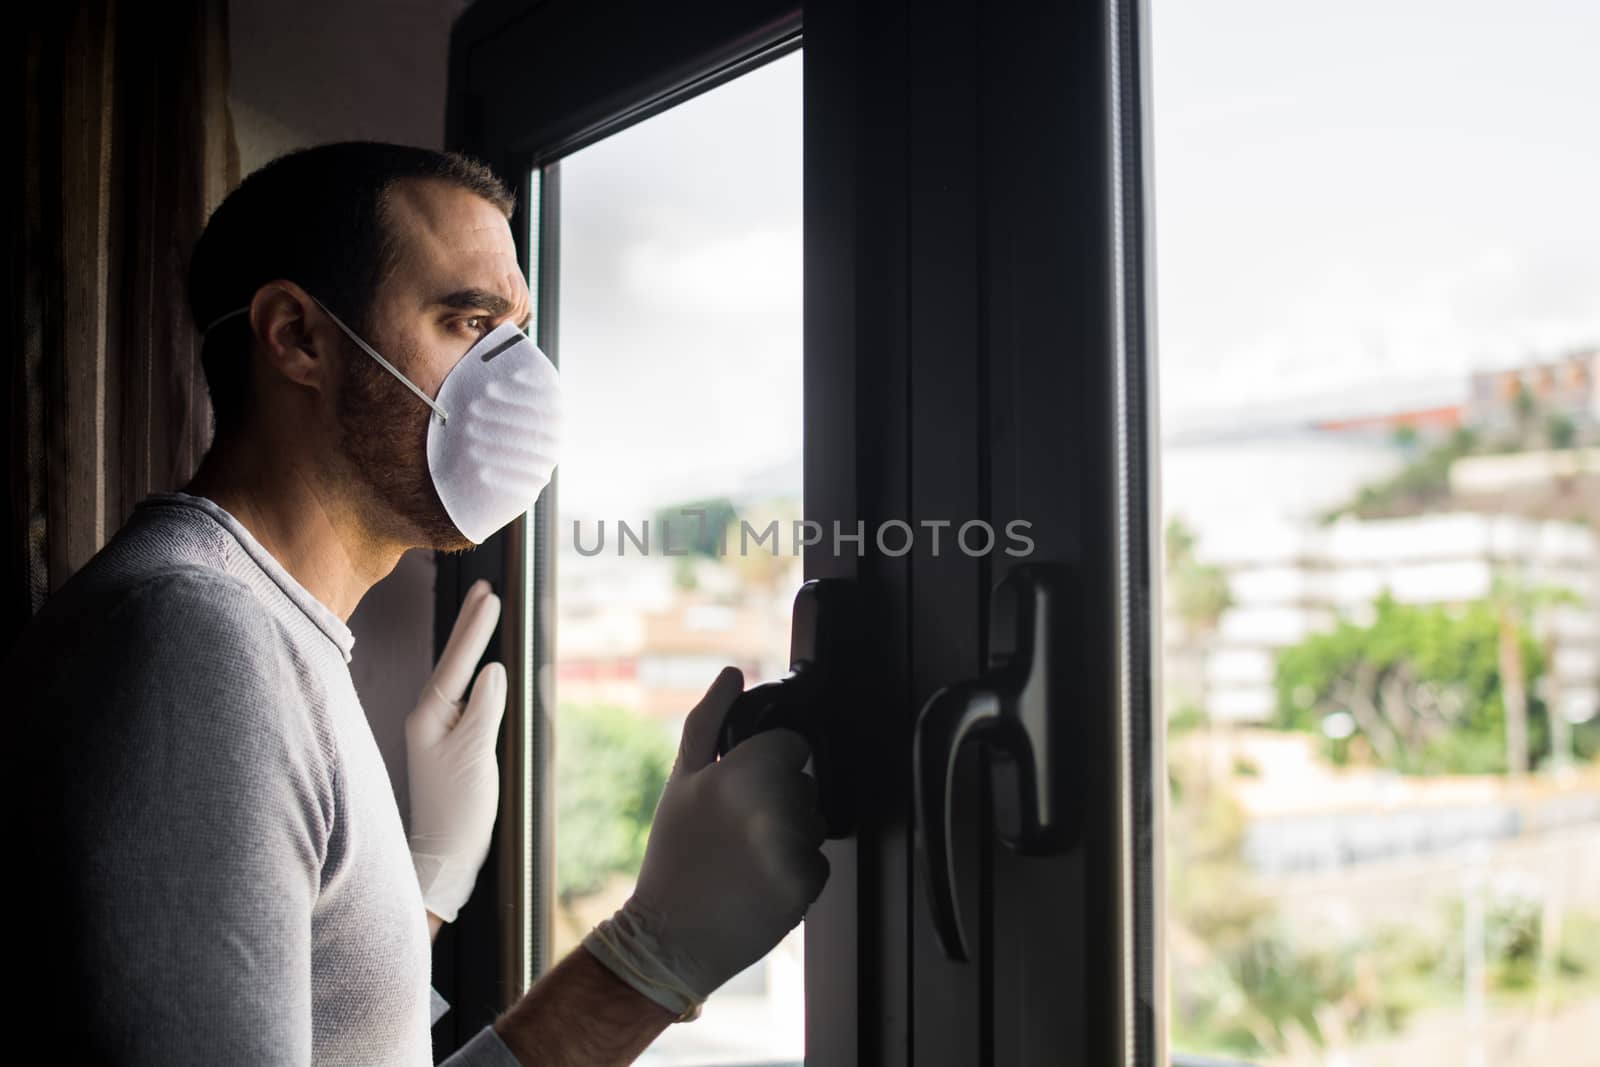 Man with face mask and gloves looking out the window. Stay at home concept.